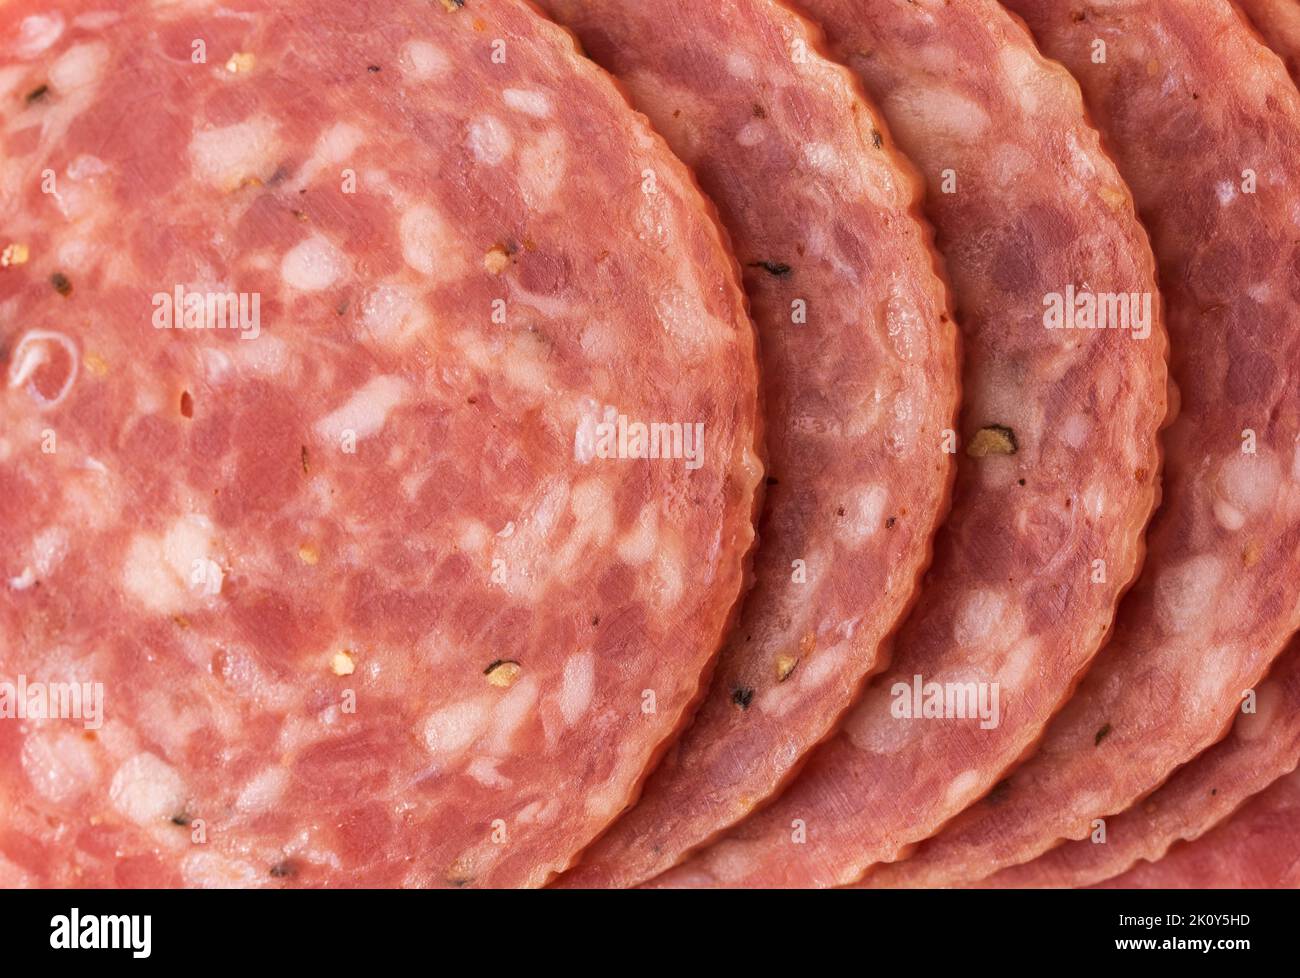 Close view of several slices of dry salami illuminated with natural light. Stock Photo